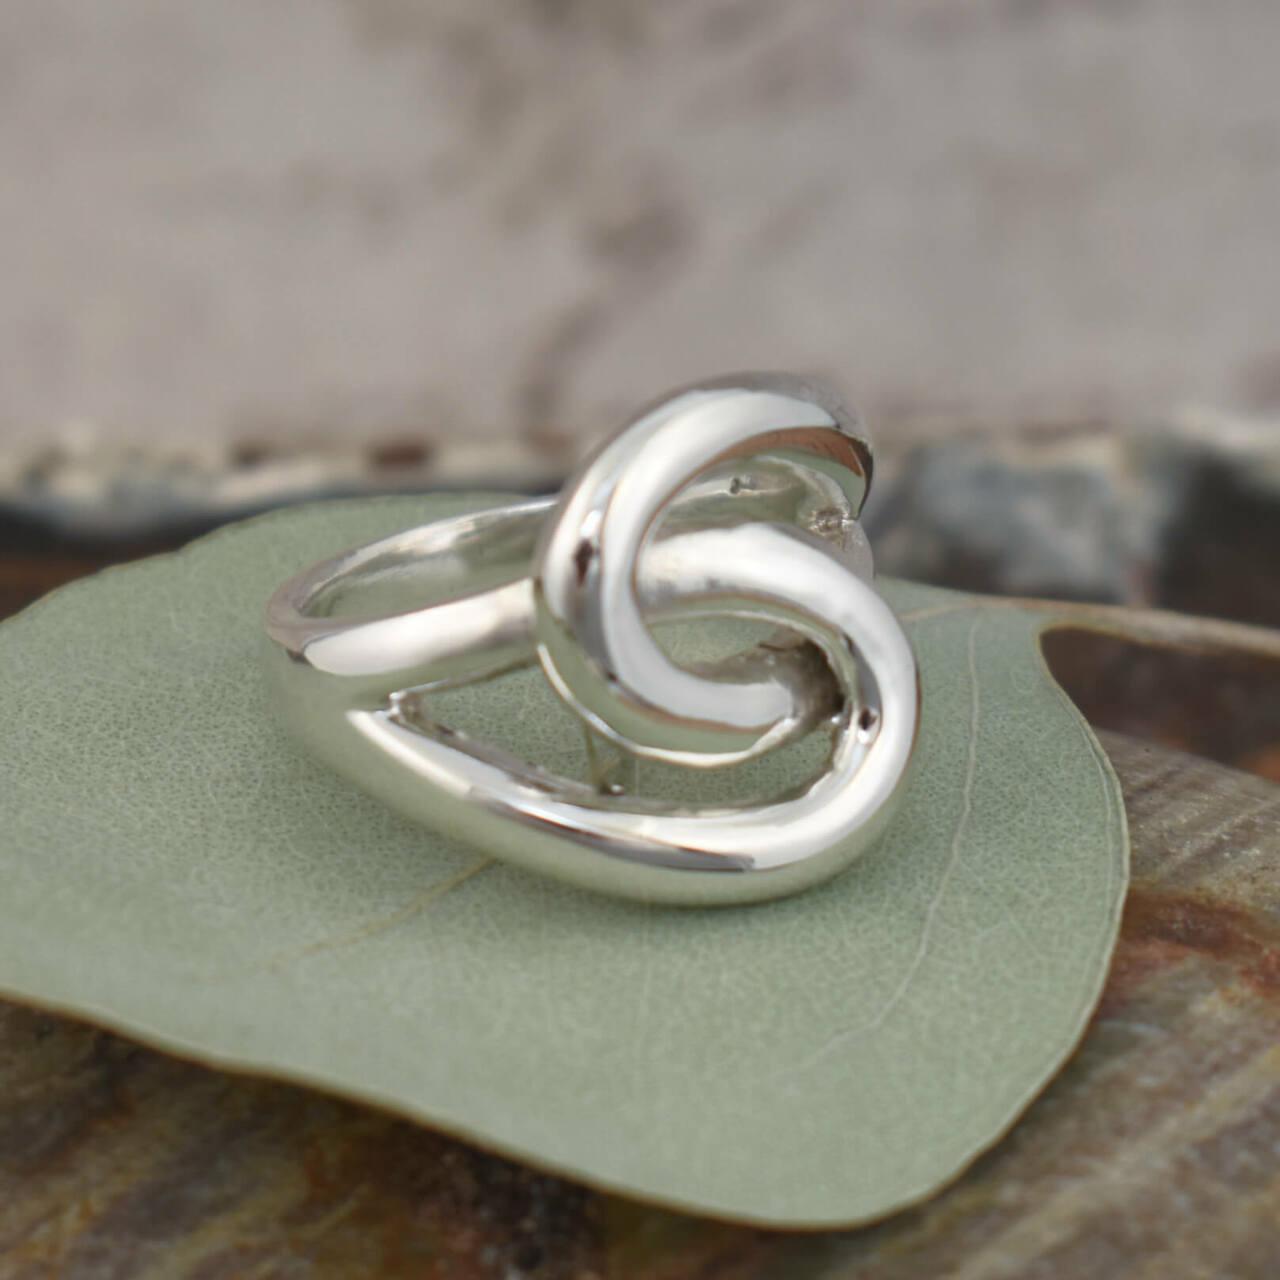 Sterling silver knot ring